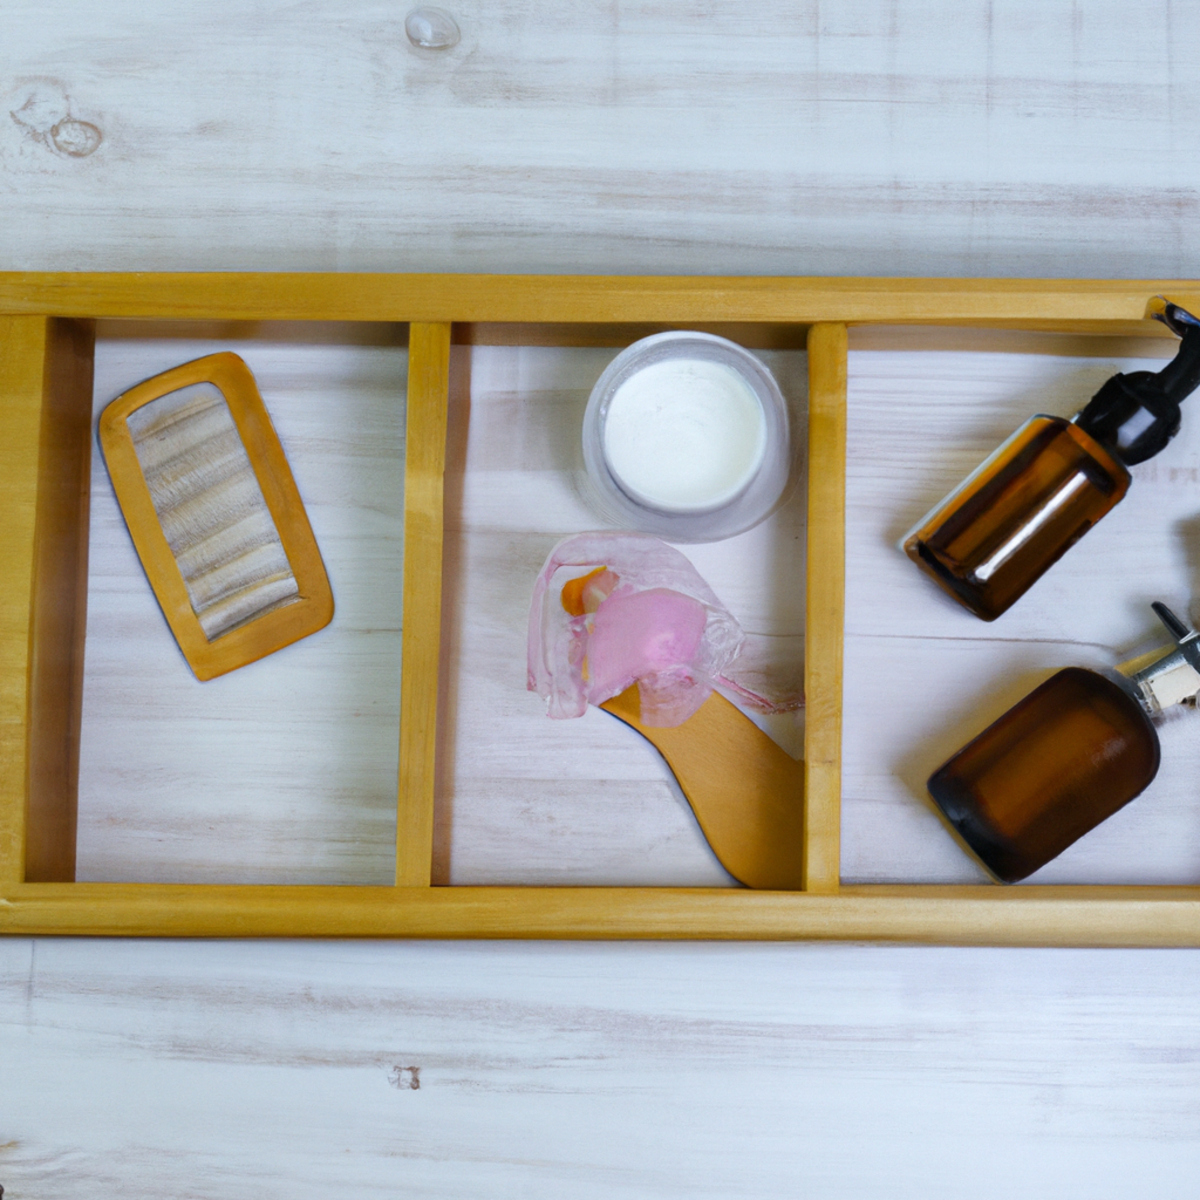 Get ready to glow with these natural skin care routines that are as pretty as they are effective. From rose water toner to facial oil, this wooden tray has everything you need to pamper your skin. And don't forget the finishing touch - a creamy white moisturizer that will leave you feeling refreshed and rejuvenated. It's time to embrace the power of nature and give your skin the love it deserves.